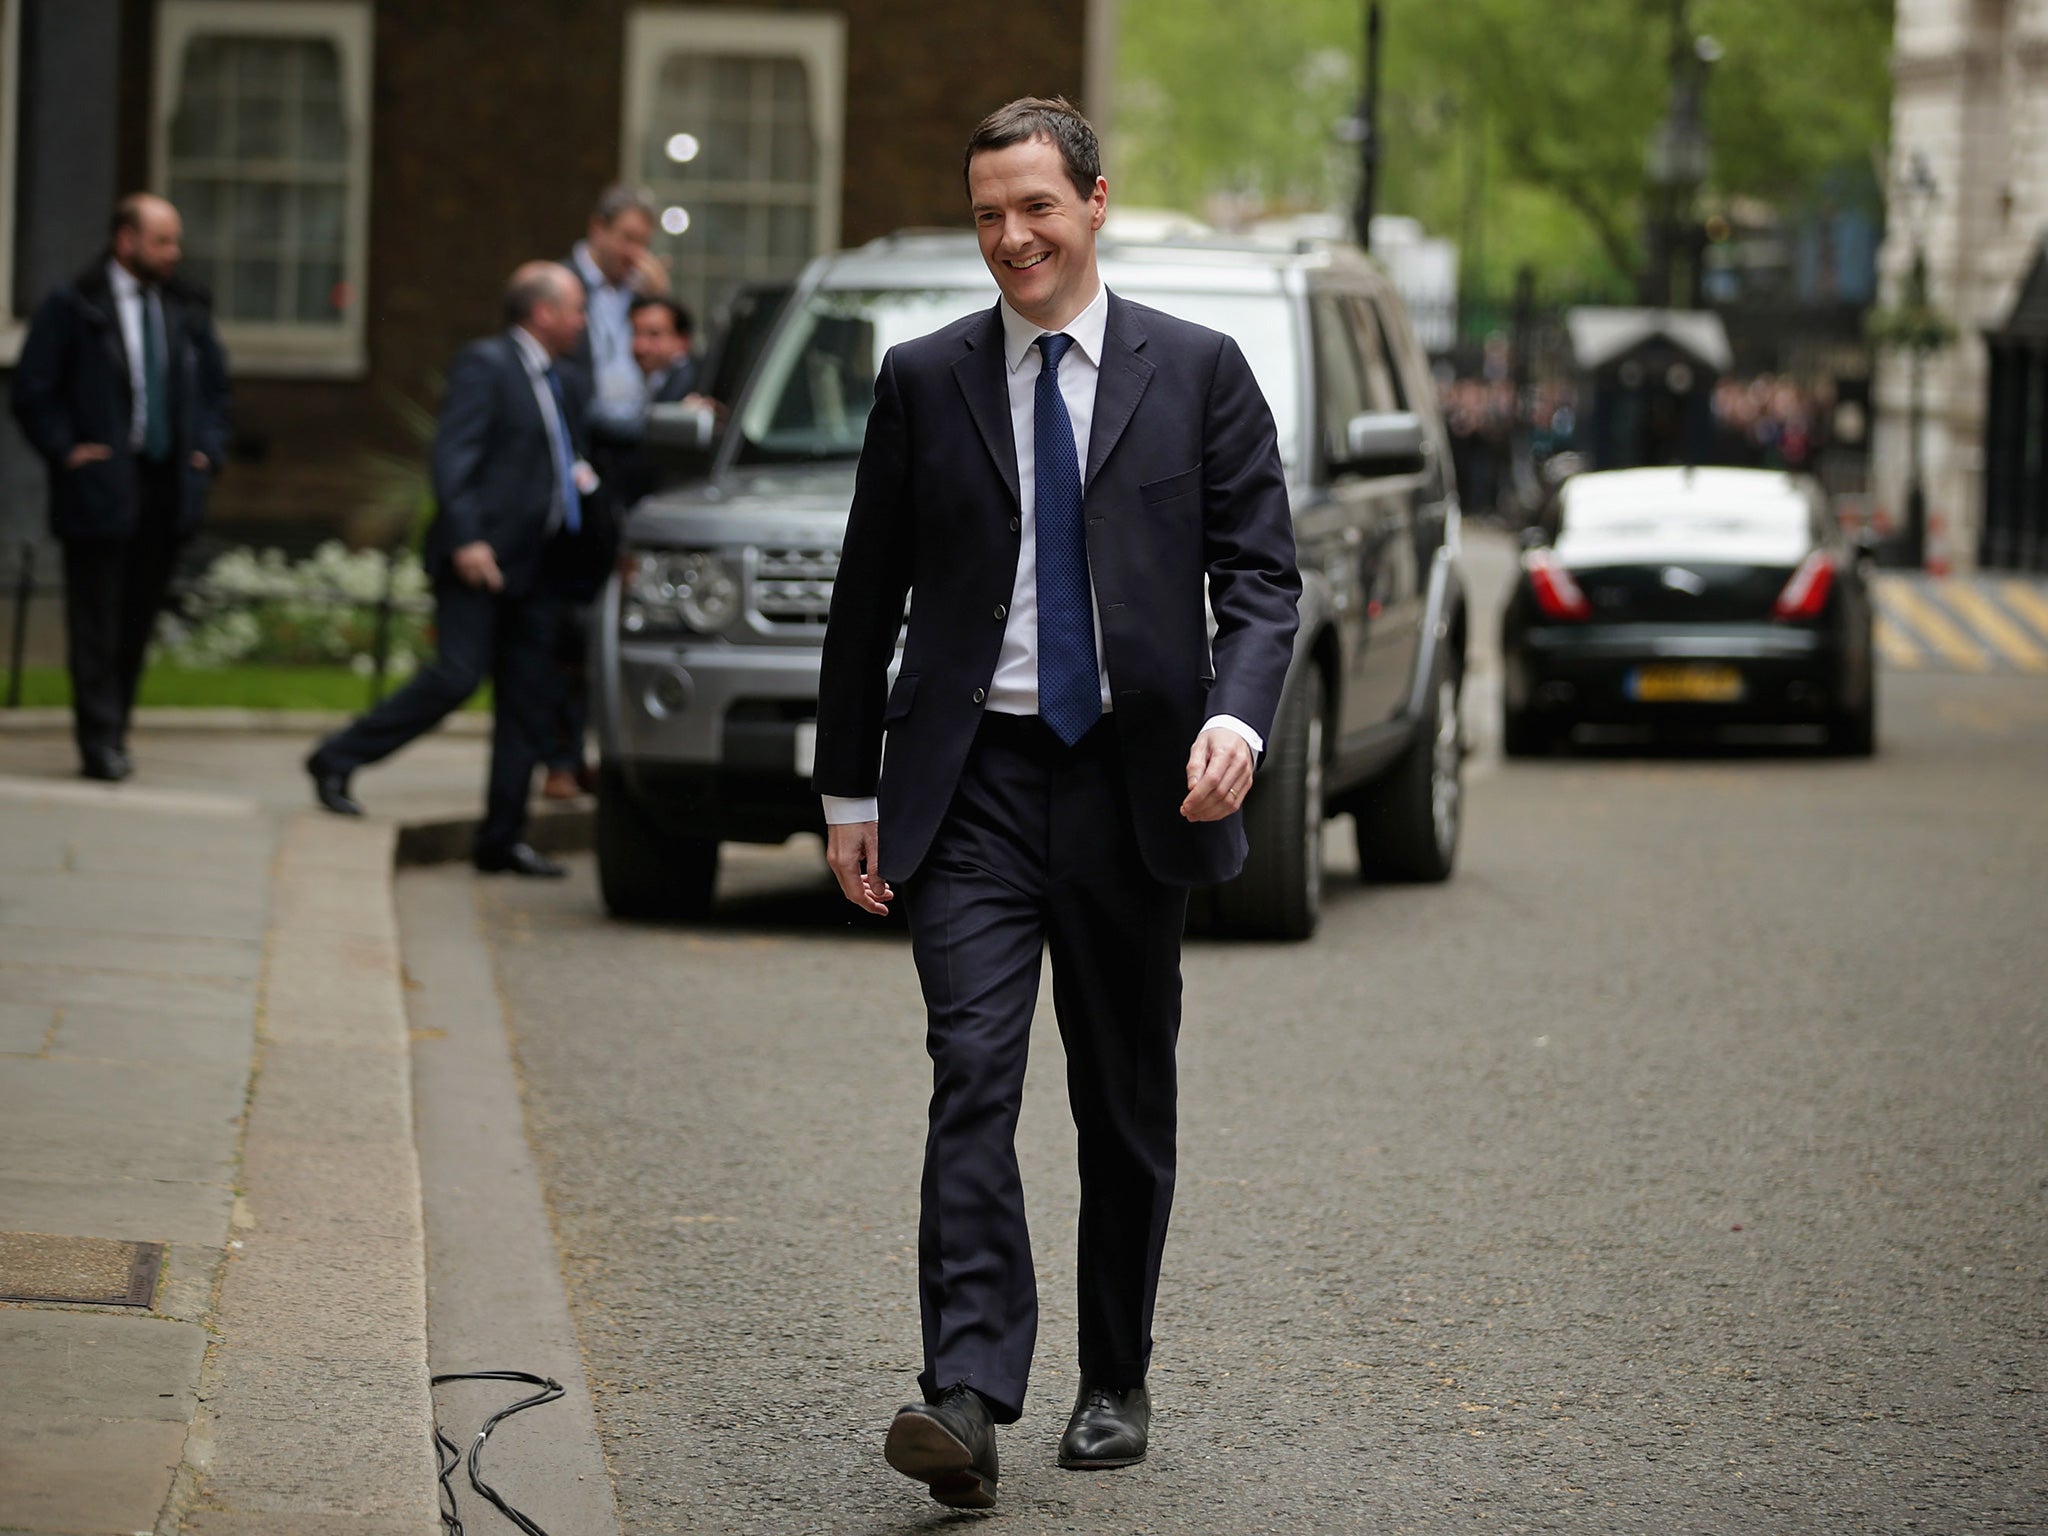 The markets responded positively to George Osborne's return to No 11 Downing Street